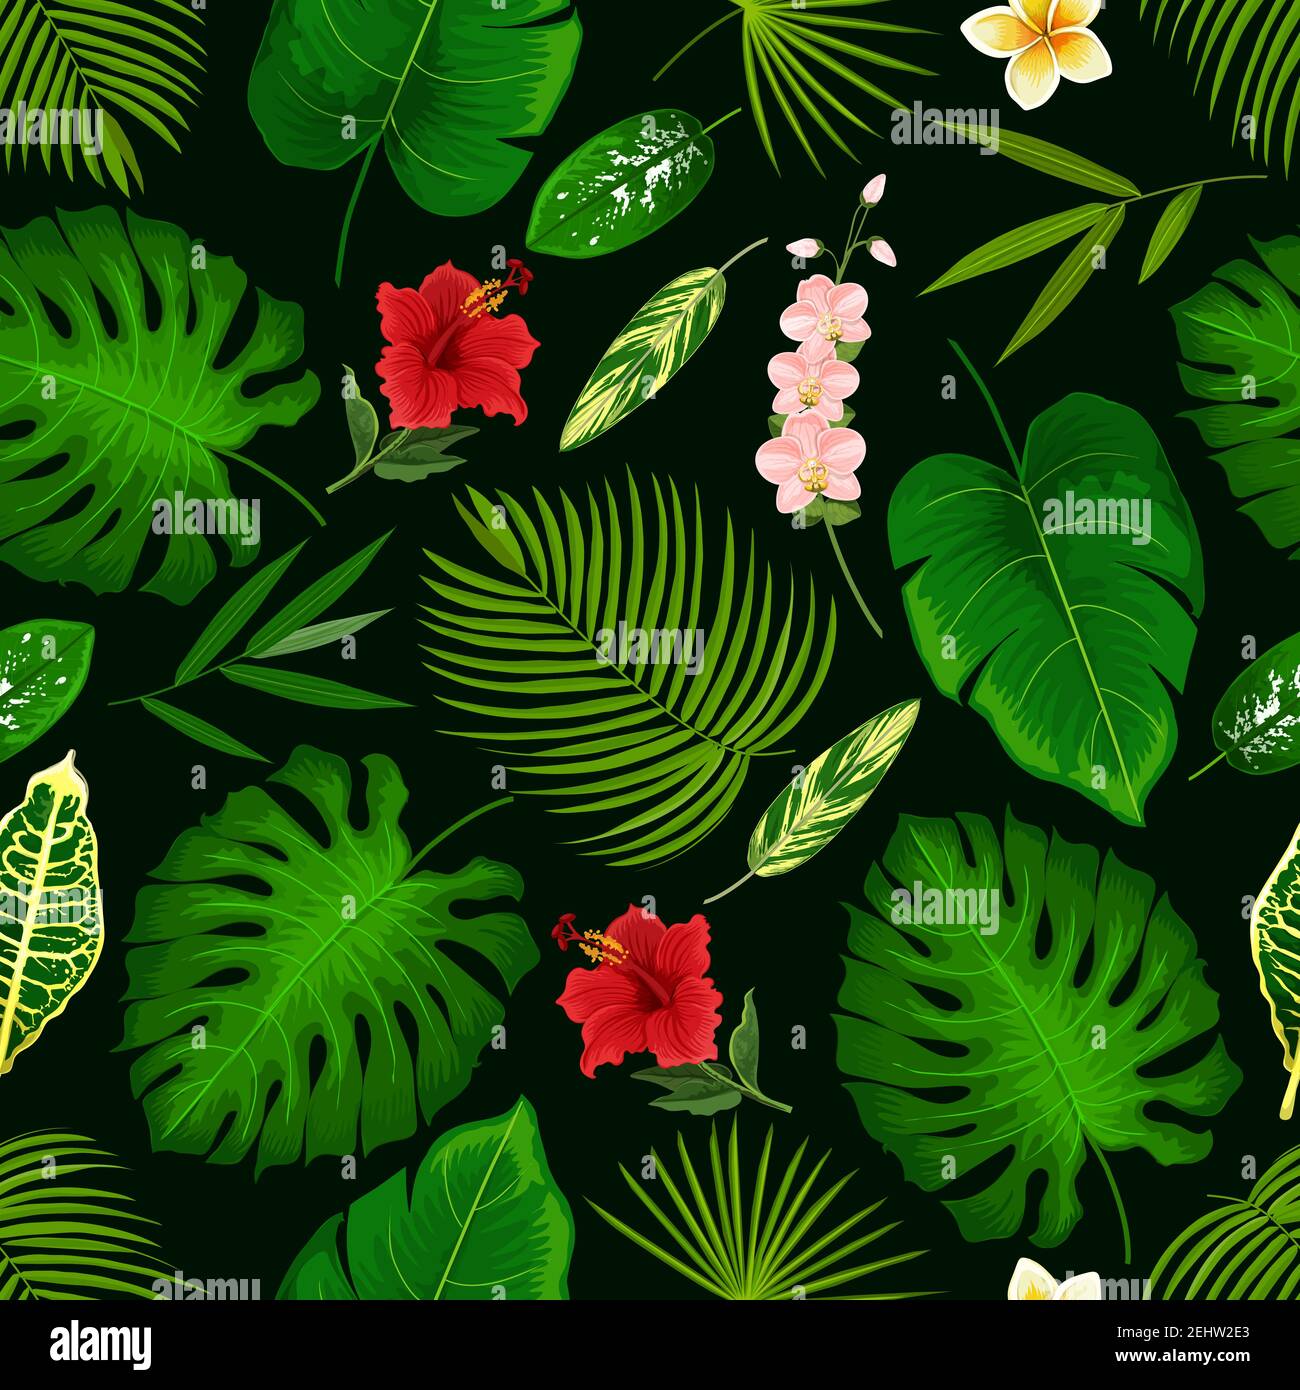 Tropical palm leaf and exotic flowers pattern background. Vector seamless design of hibiscus, banana palm or monstera leaf and fern plant, cyperus or Stock Vector